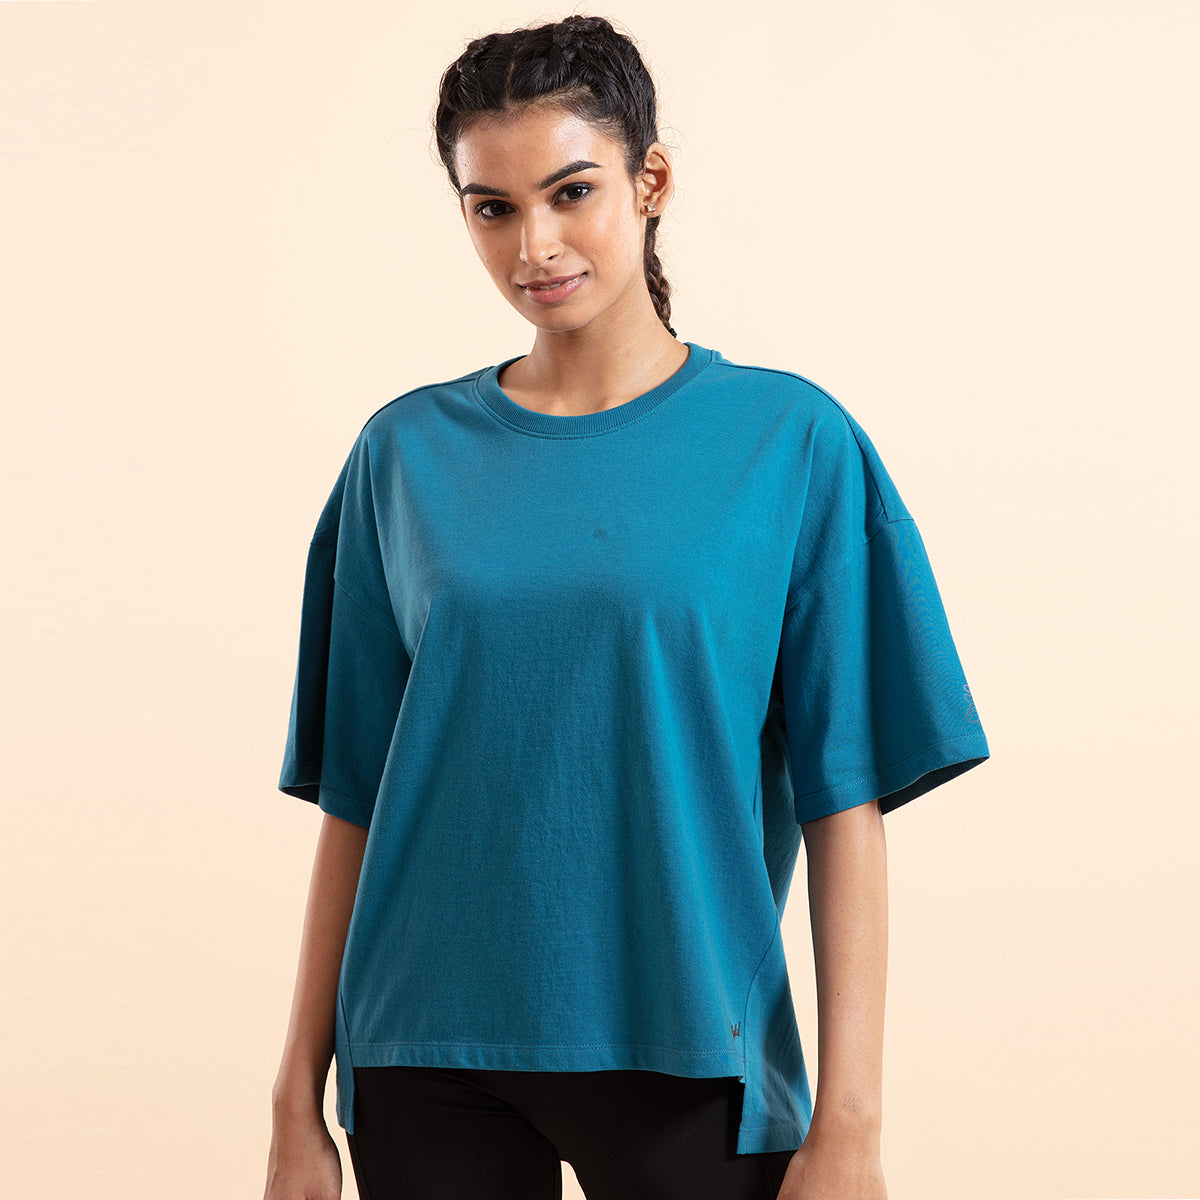 Nykd All Day Heart on my sleeve Oversized Cotton T-shirt-NYLE107 Saxony Blue